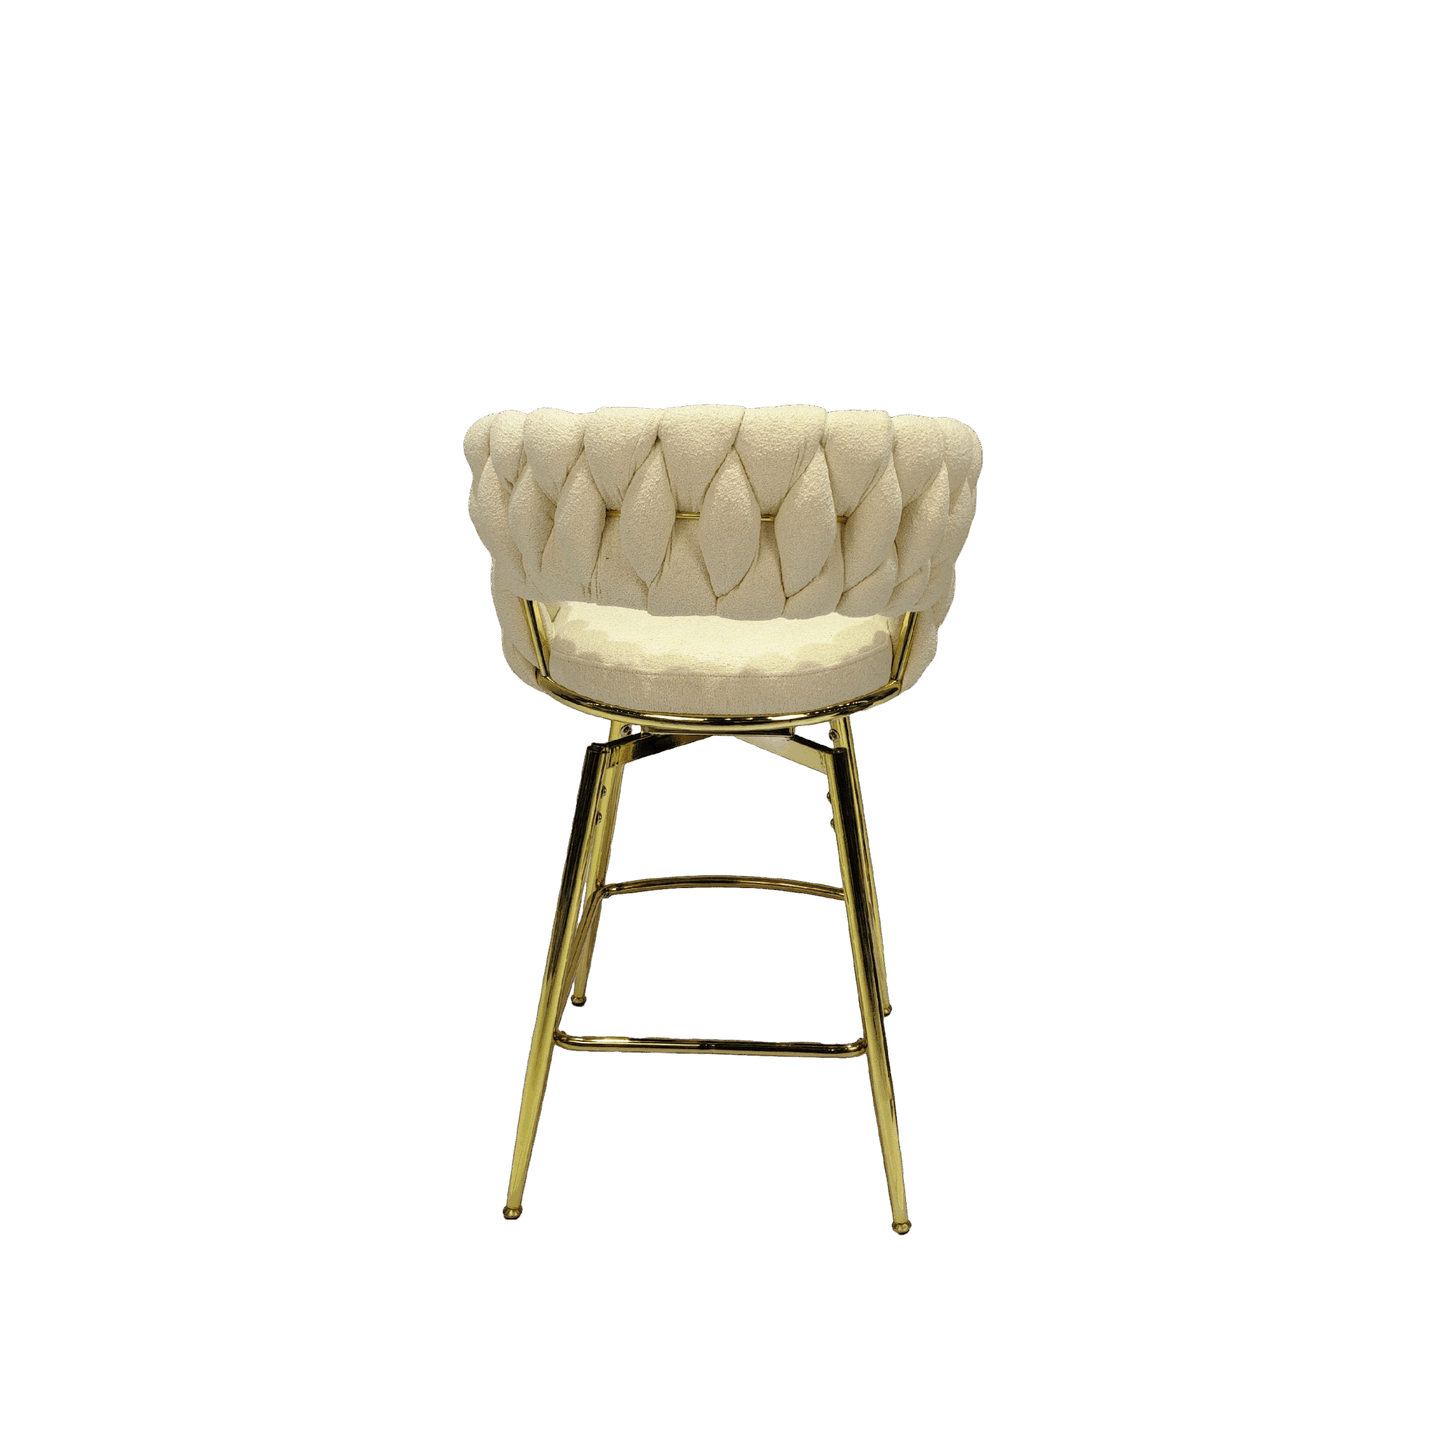 bar chair toweling woven bar stool set of 4, white